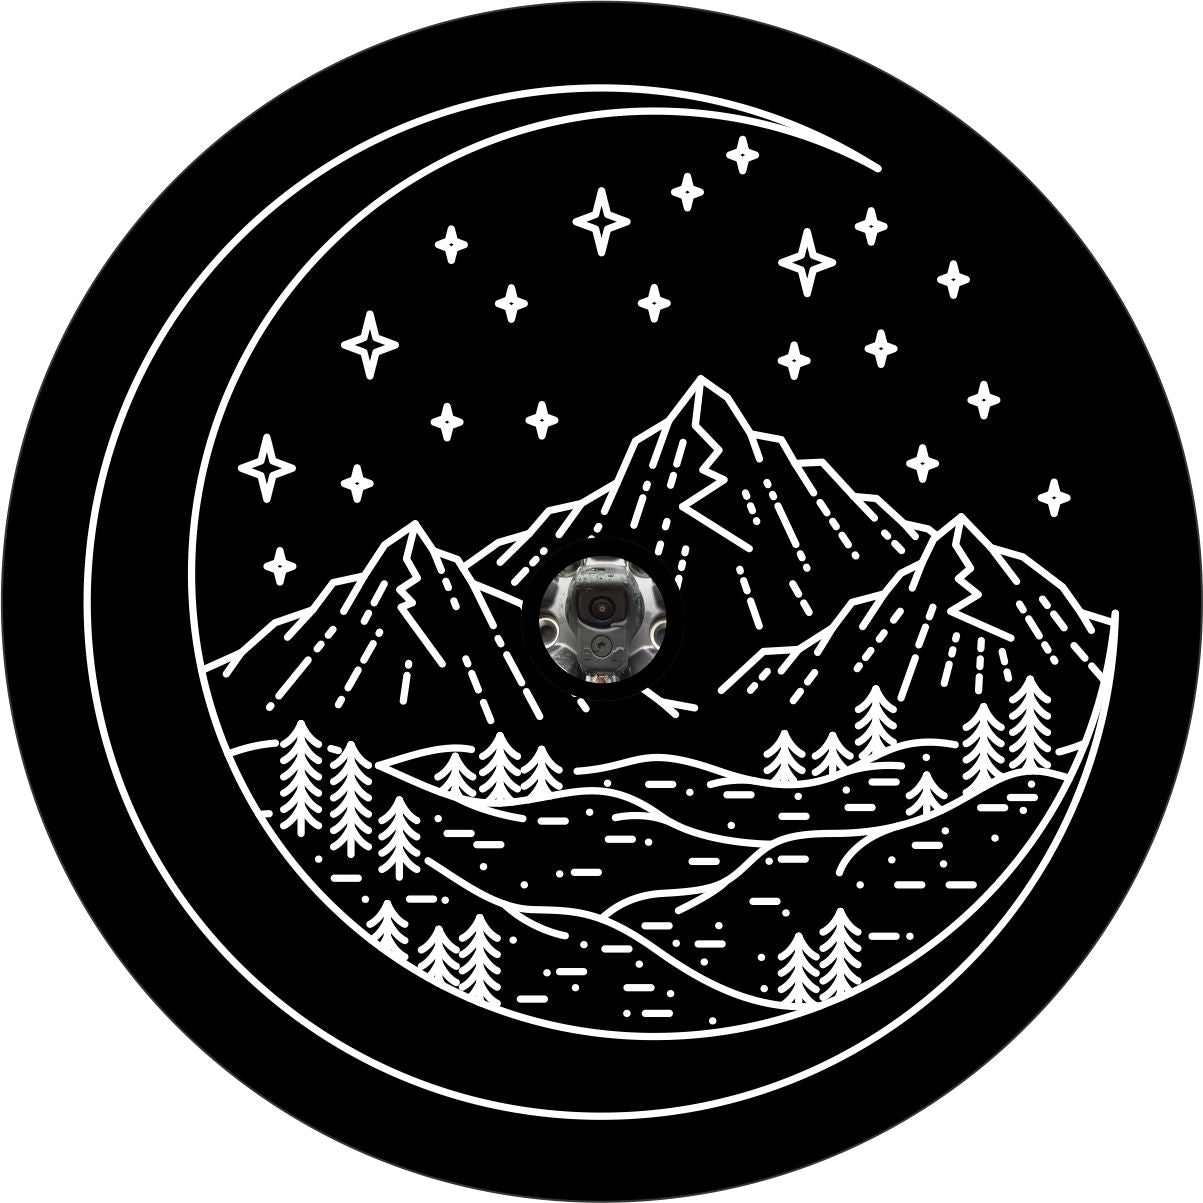 A unique spare tire cover design of a mountain scene designed int a crescent moon and a center hole space for a backup camera.